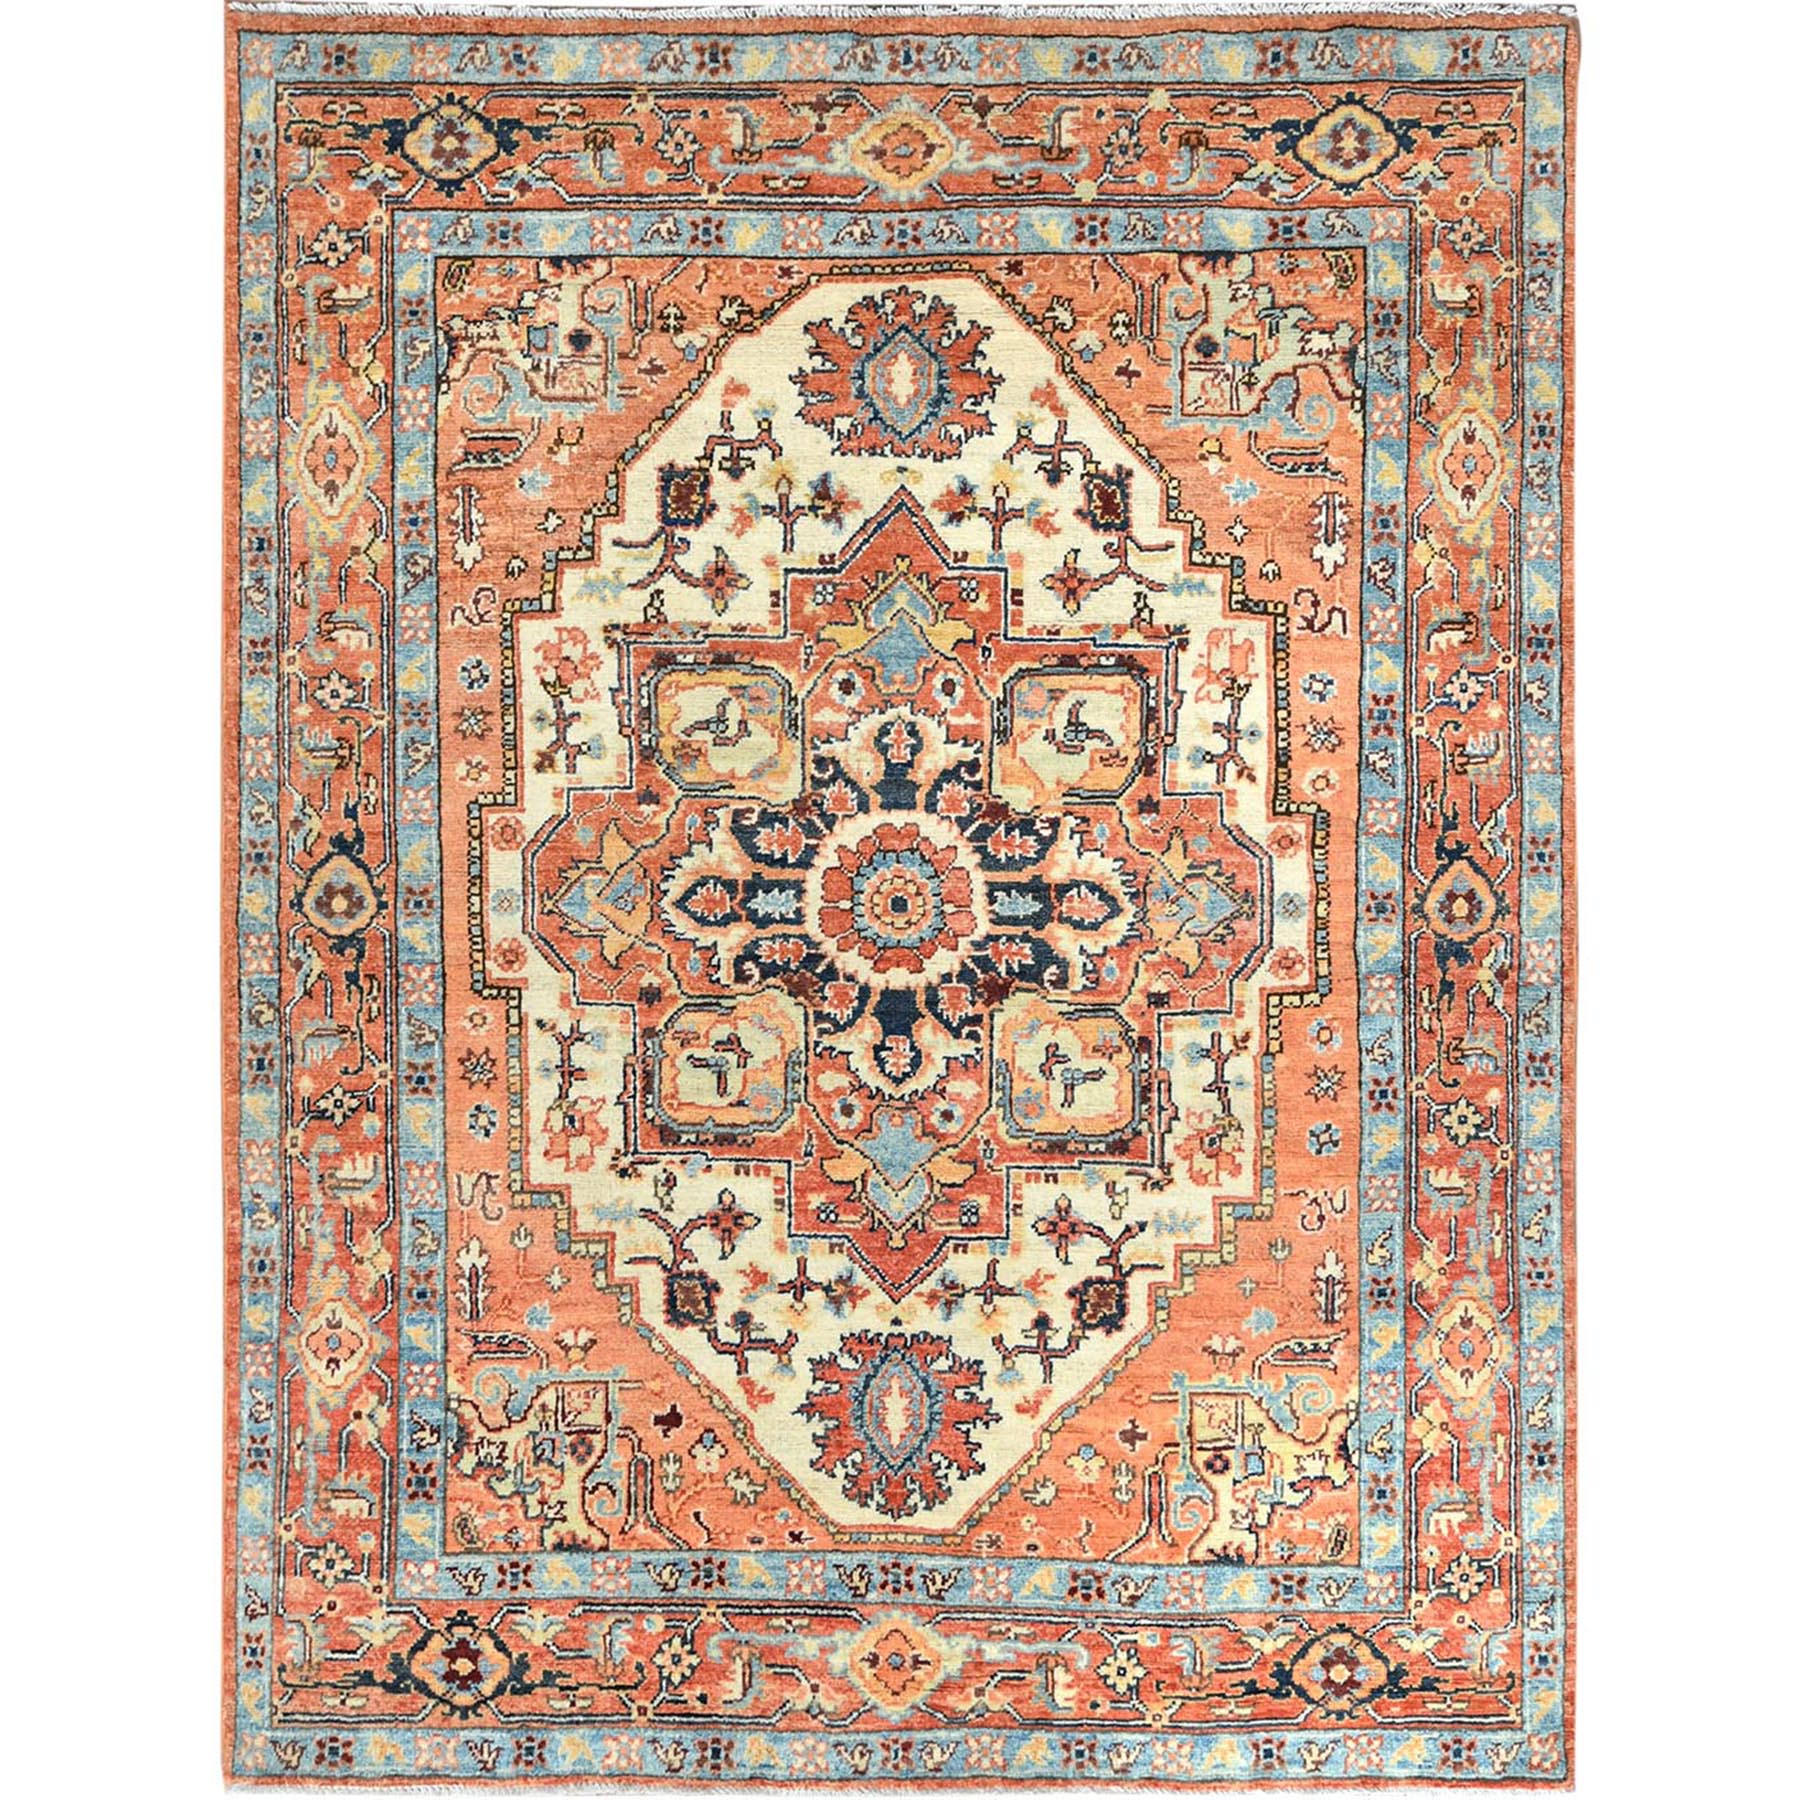  Wool Hand-Knotted Area Rug 4'10